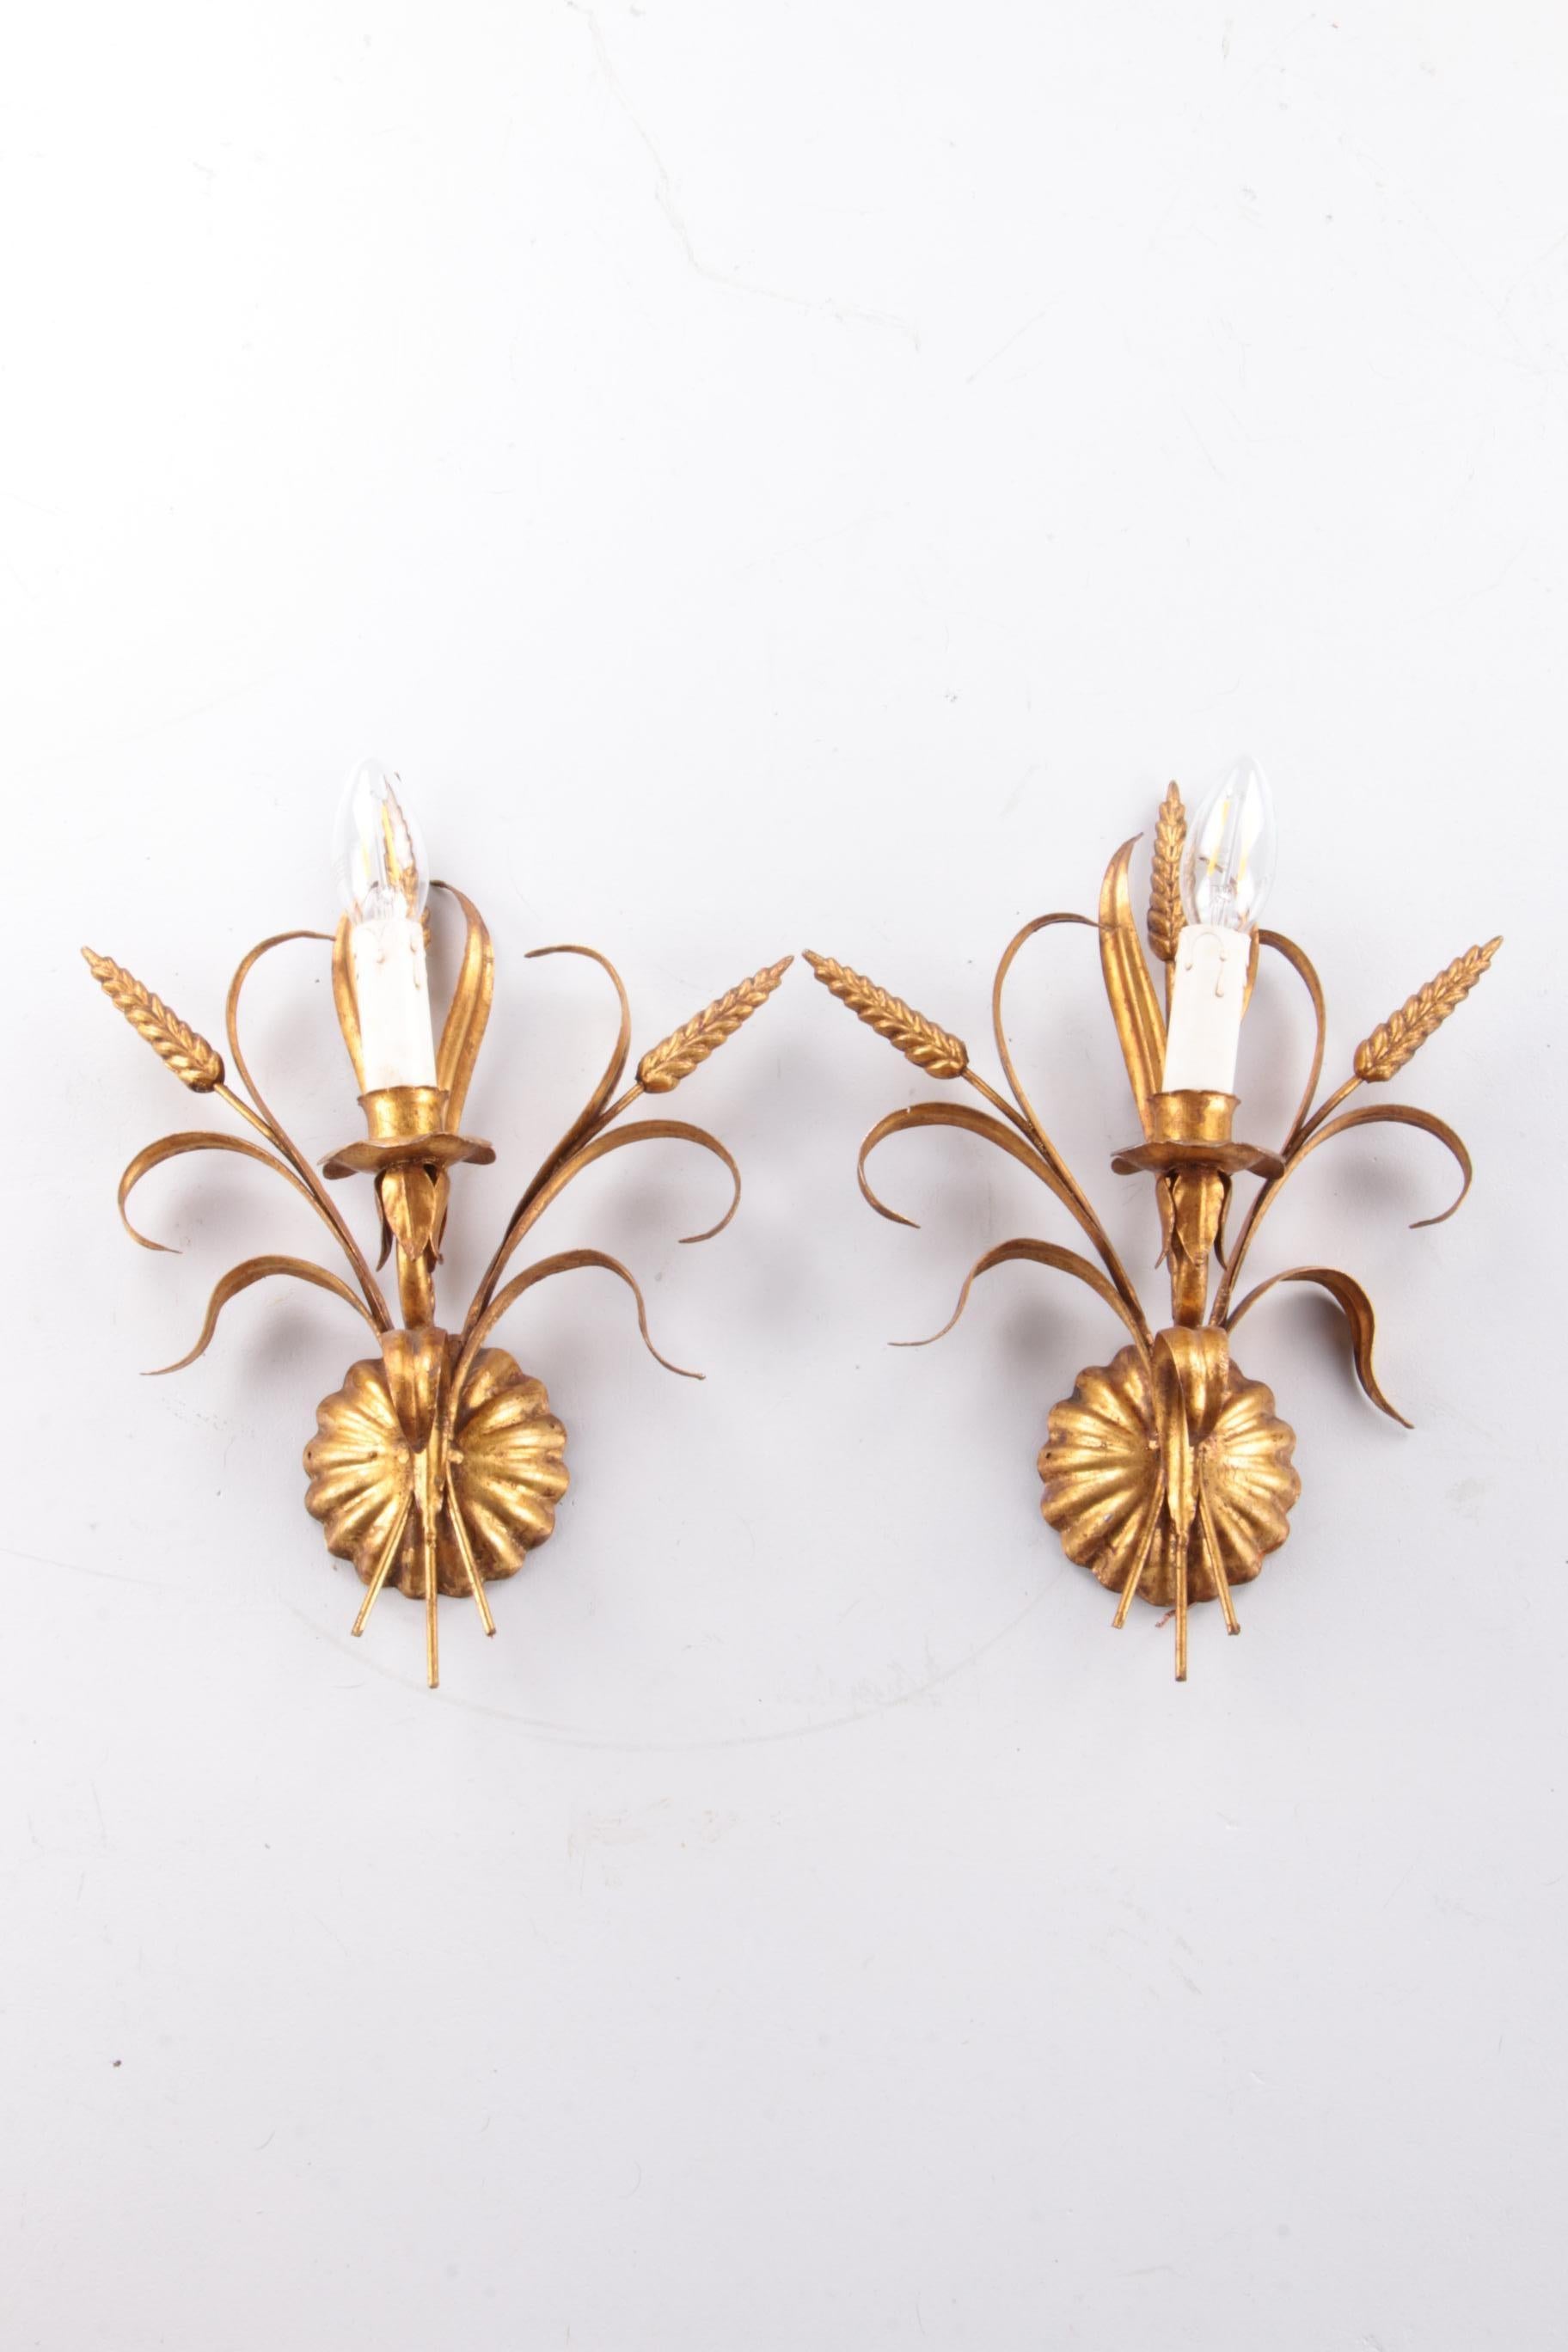 Gold Plate Pair of Vintage Wall Lamps in Regency Style by Hans Kogl, 1970 For Sale